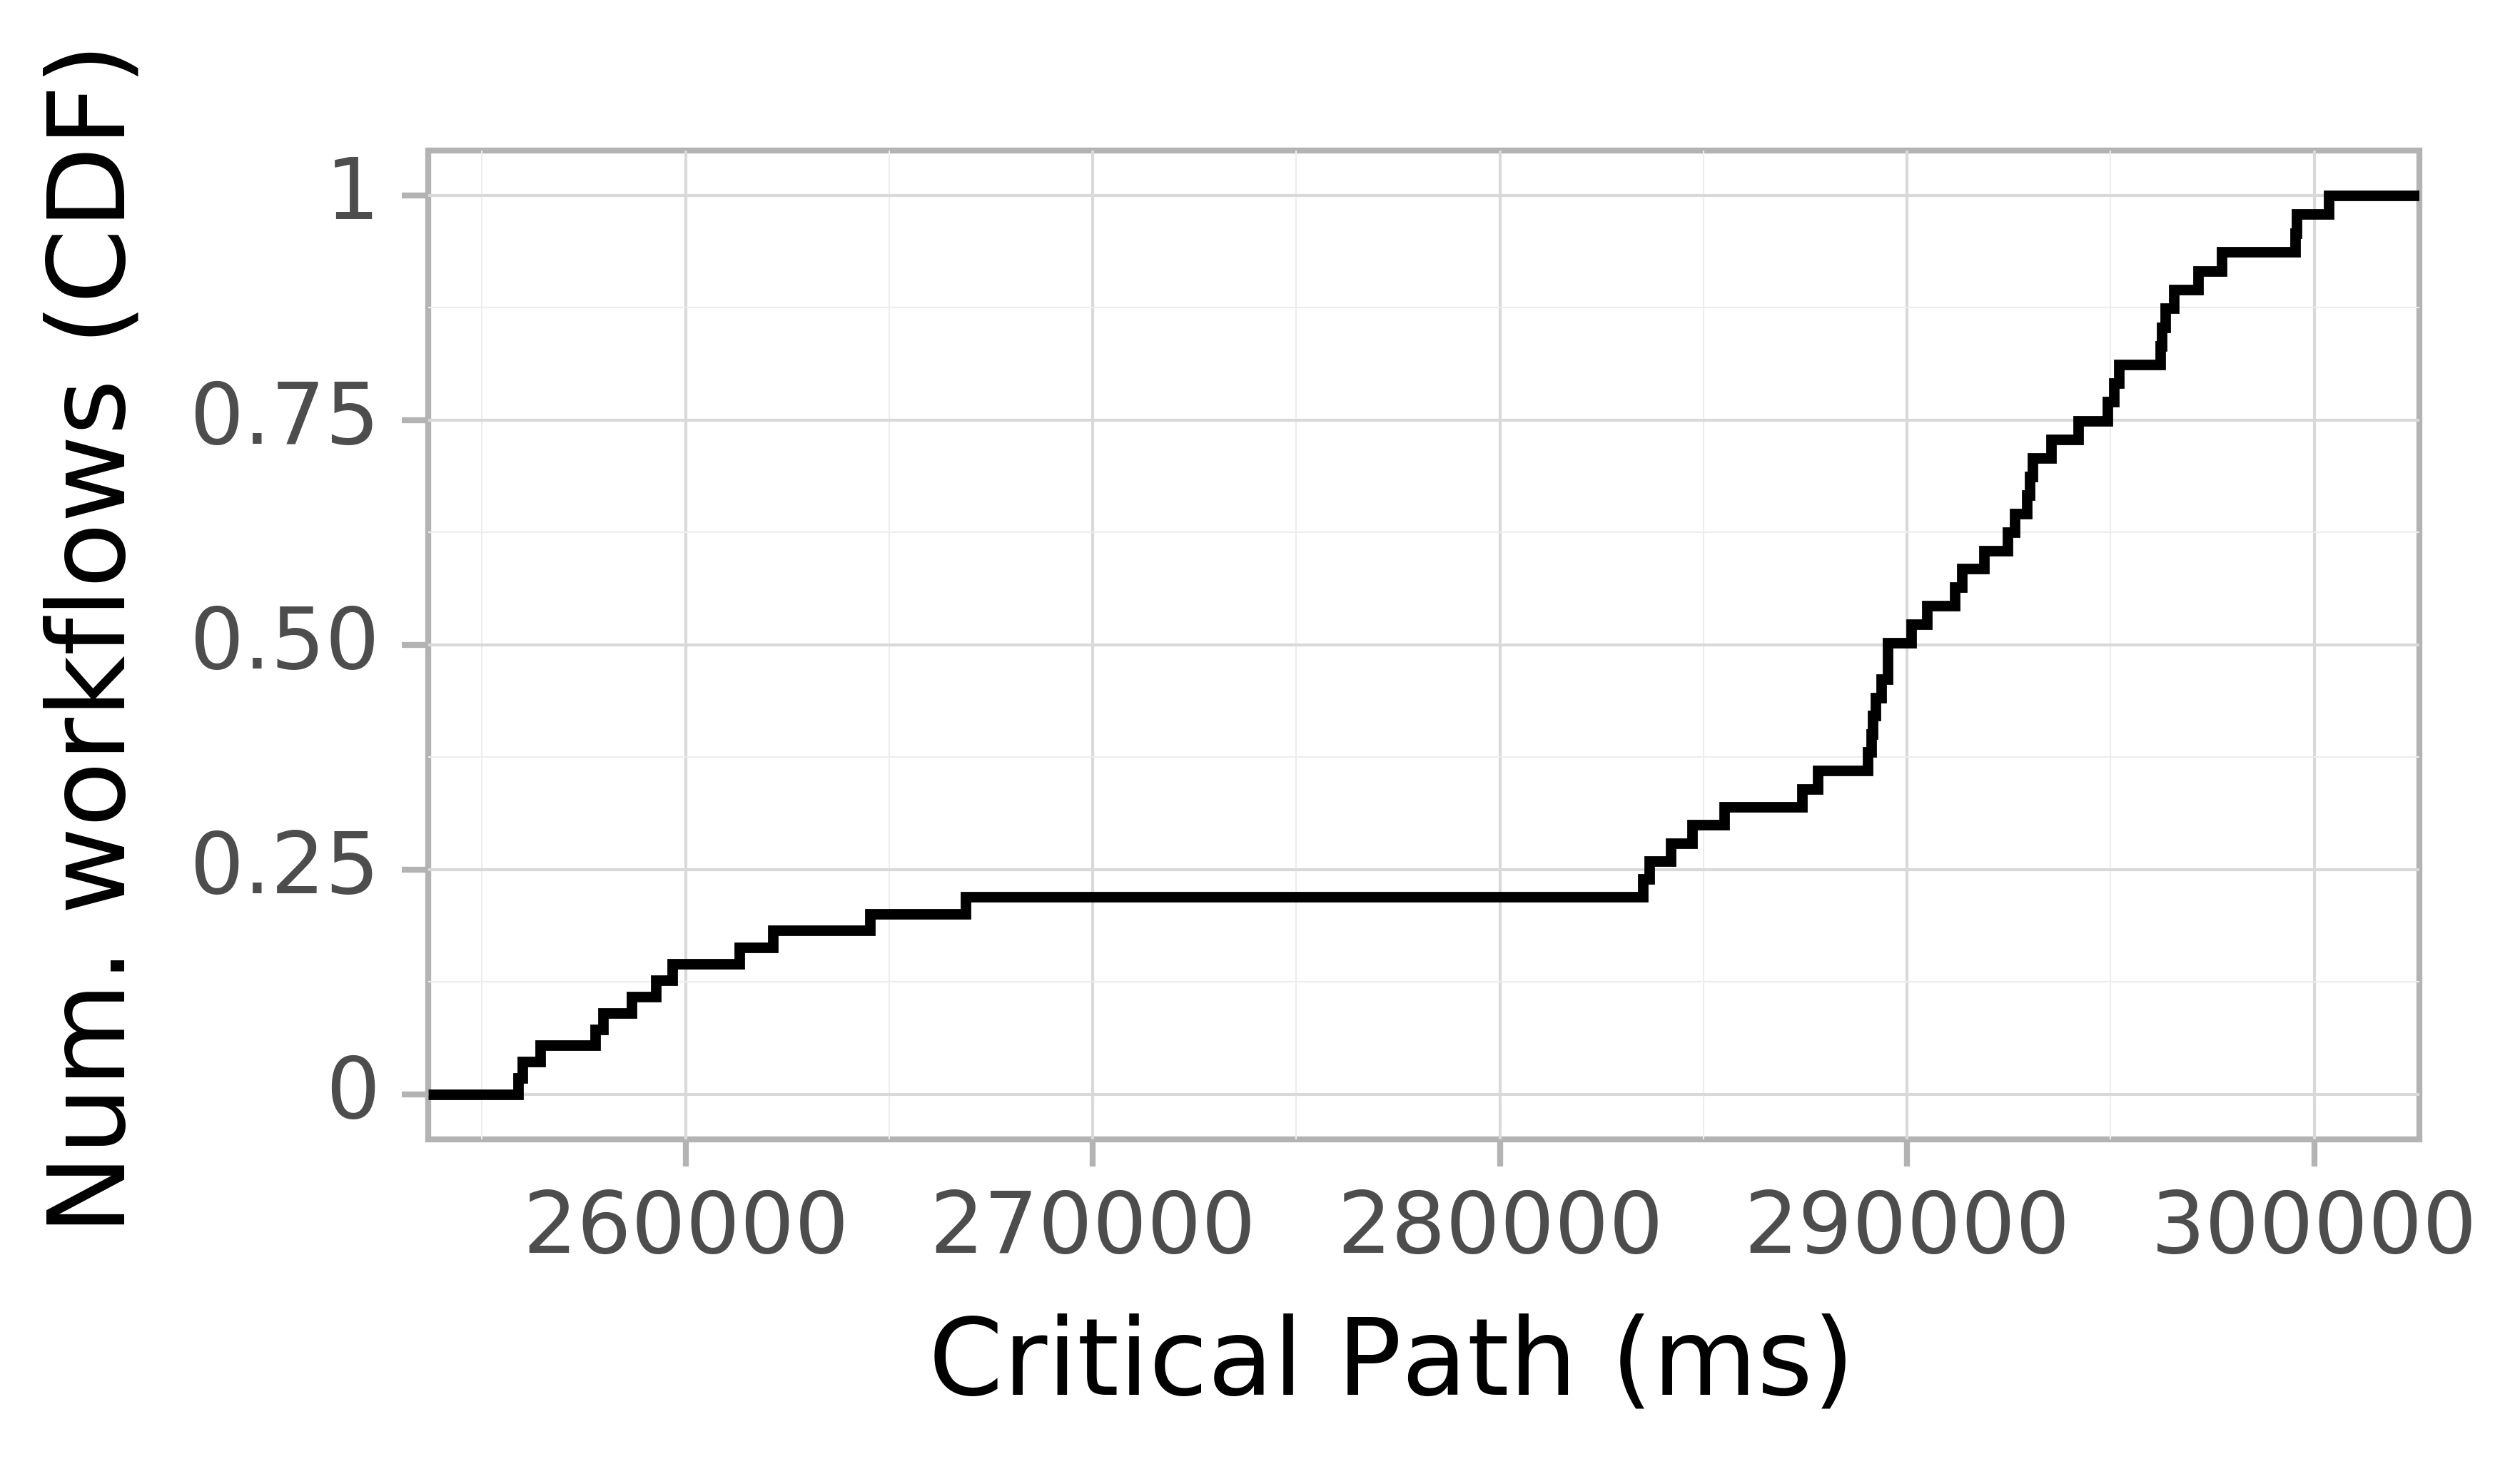 Job runtime CDF graph for the askalon-new_ee52 trace.